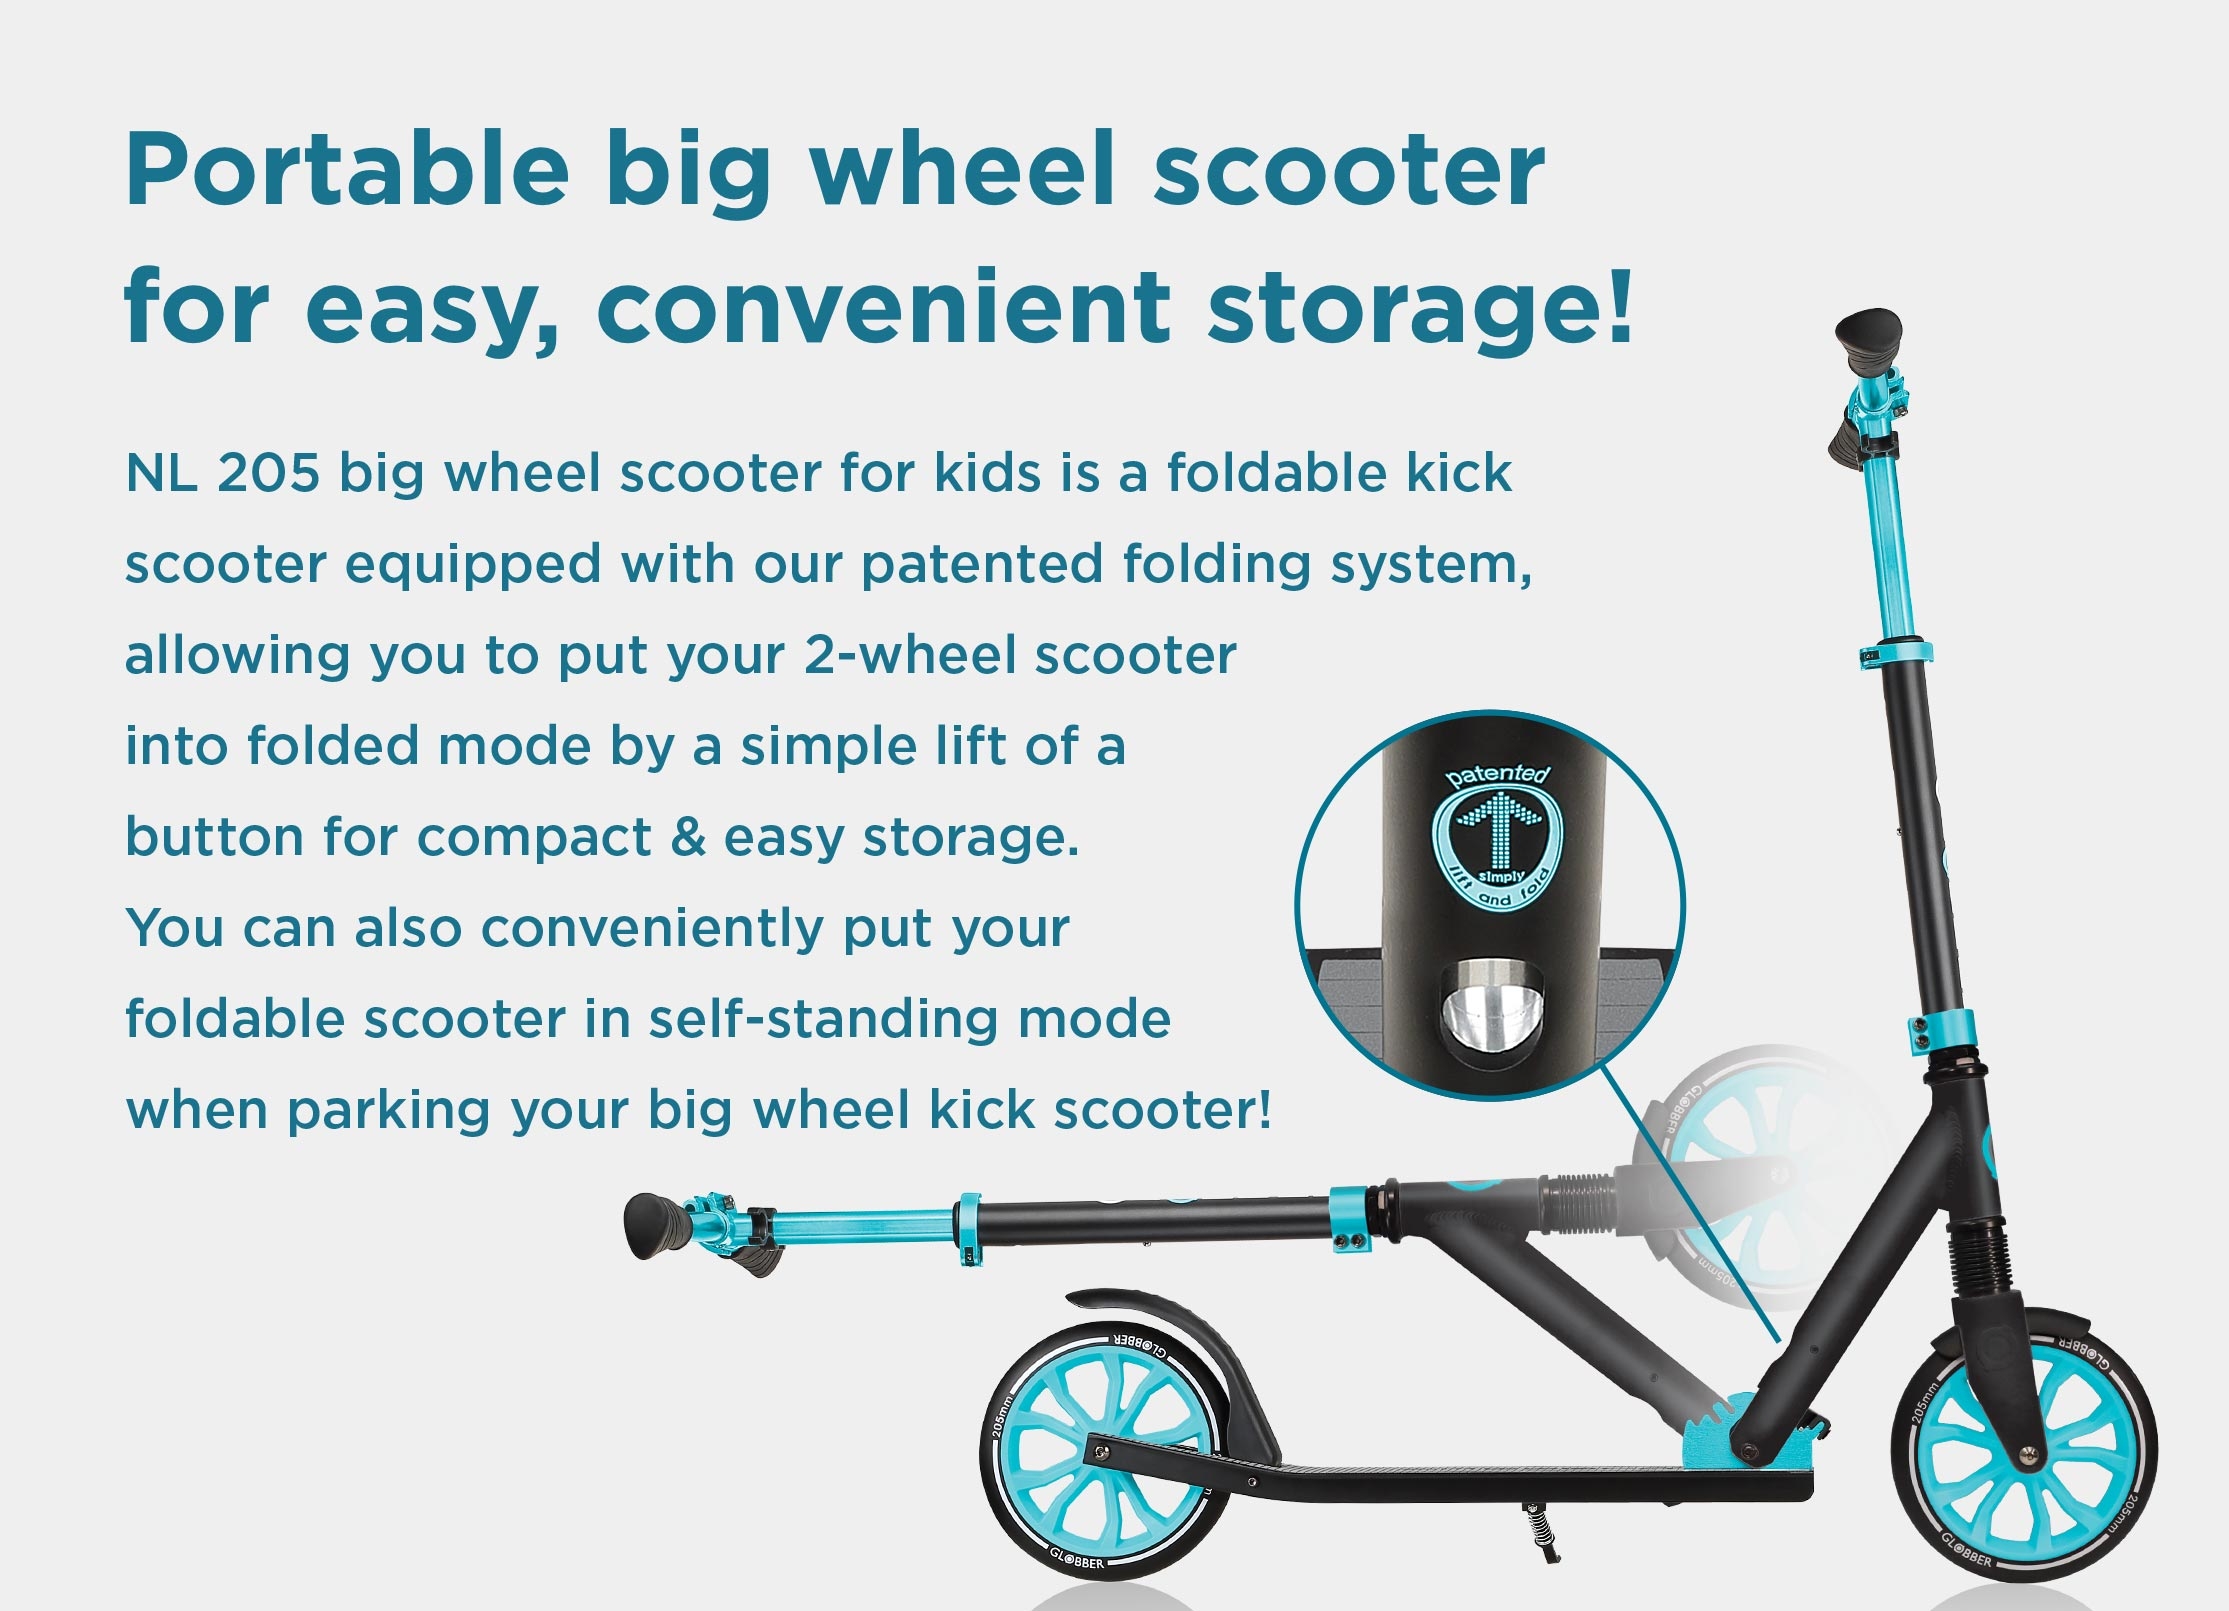 Best big wheel scooter for kids that's easy to carry around and store